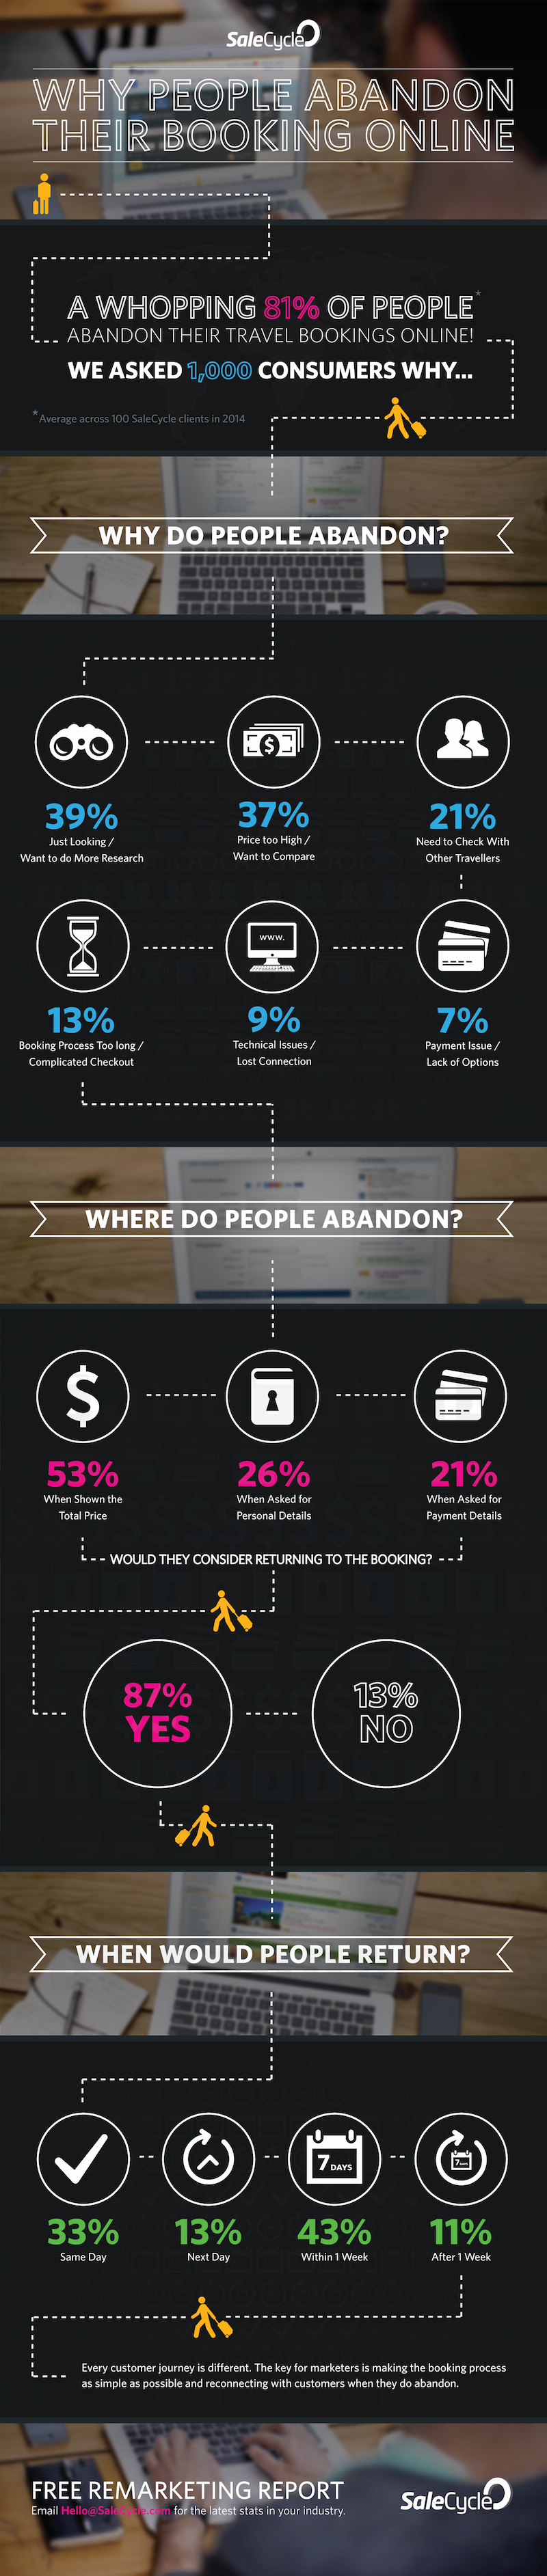 2016-7-10-2015-Infographic-Why-People-Abandon-Their-Booking-Online